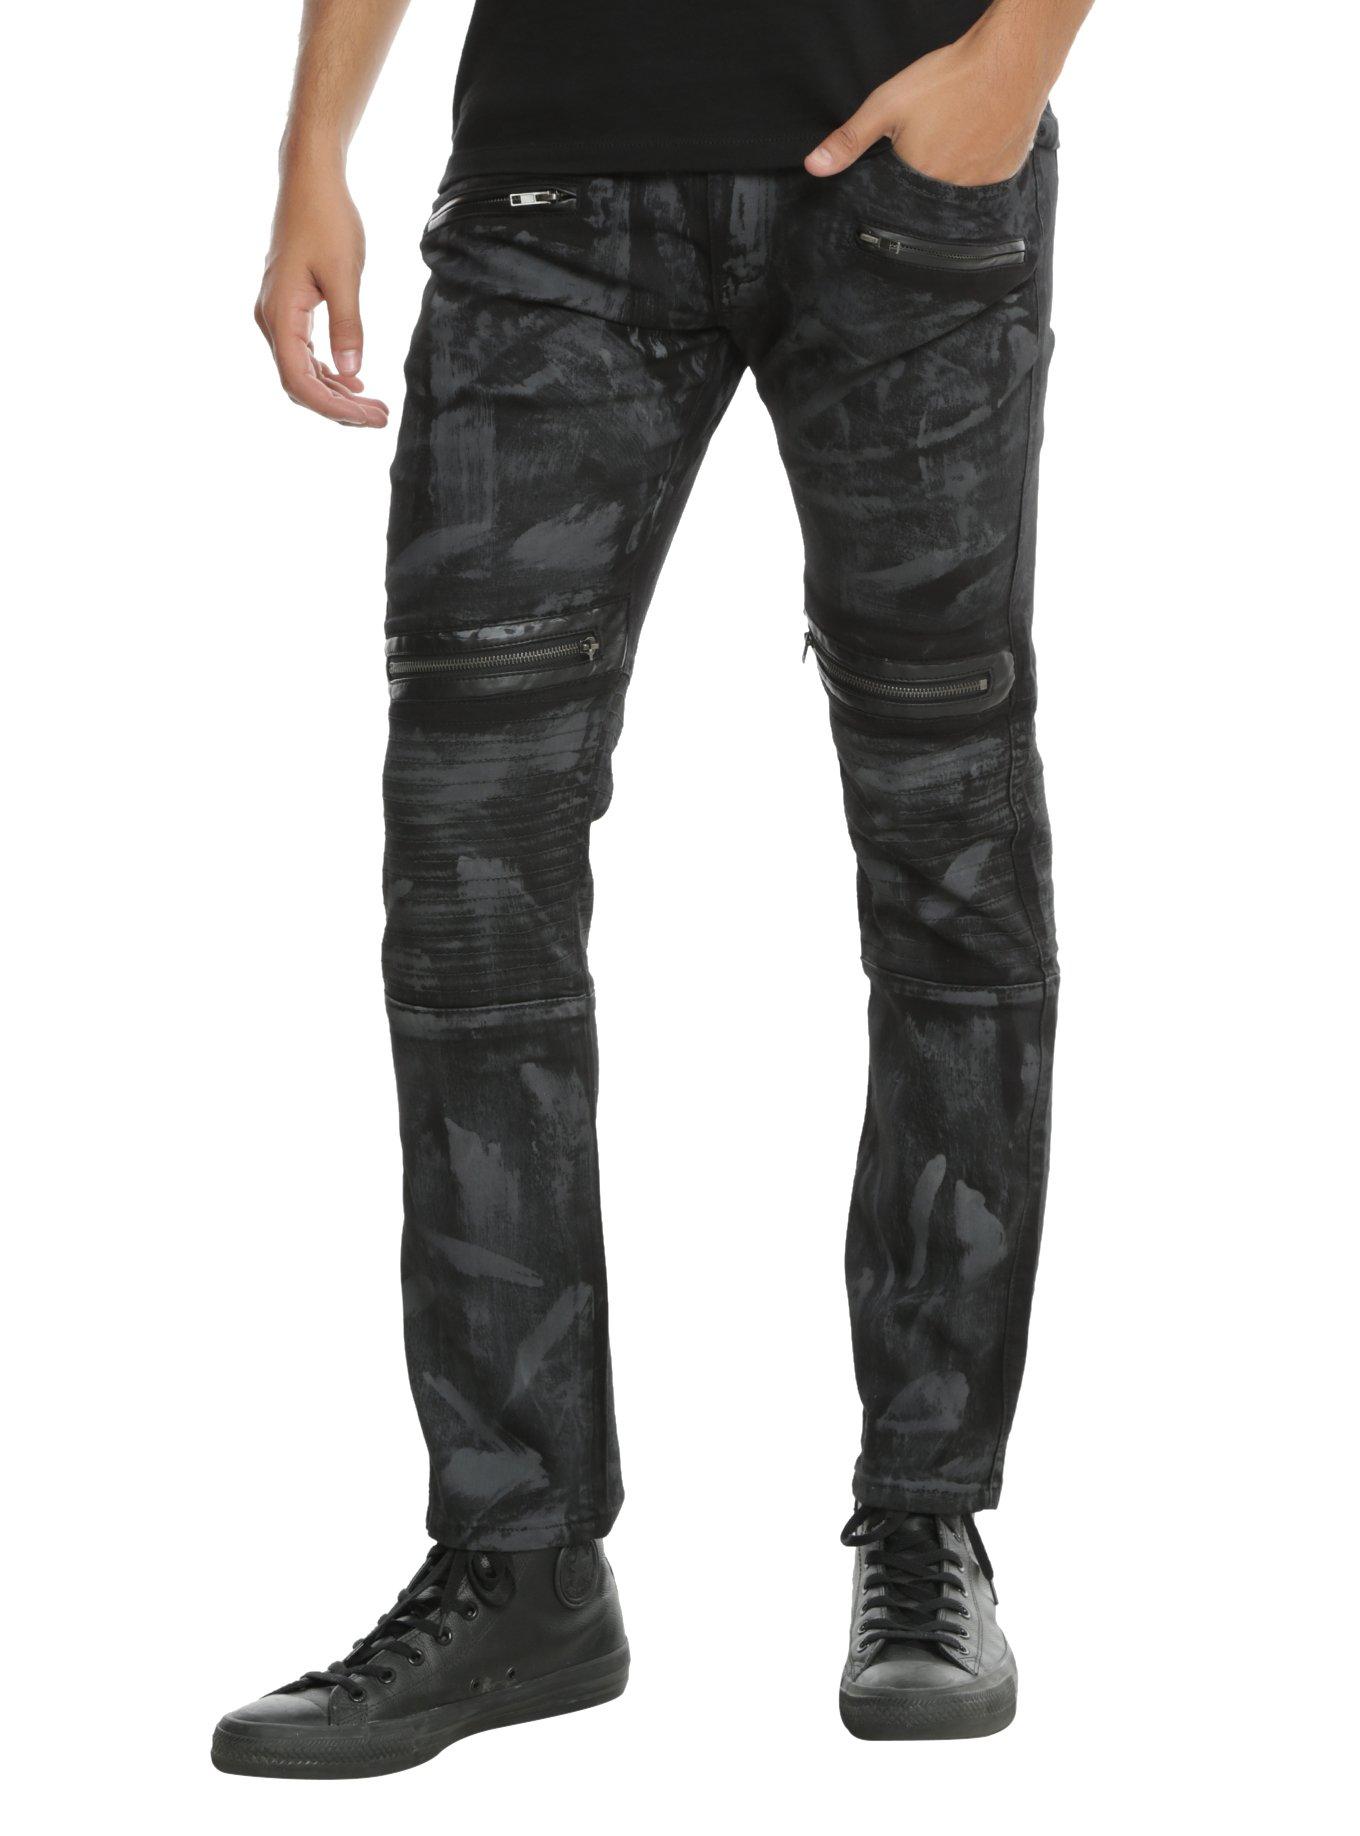 BlacX Black Painted Wash Moto Knee Jeans | Hot Topic